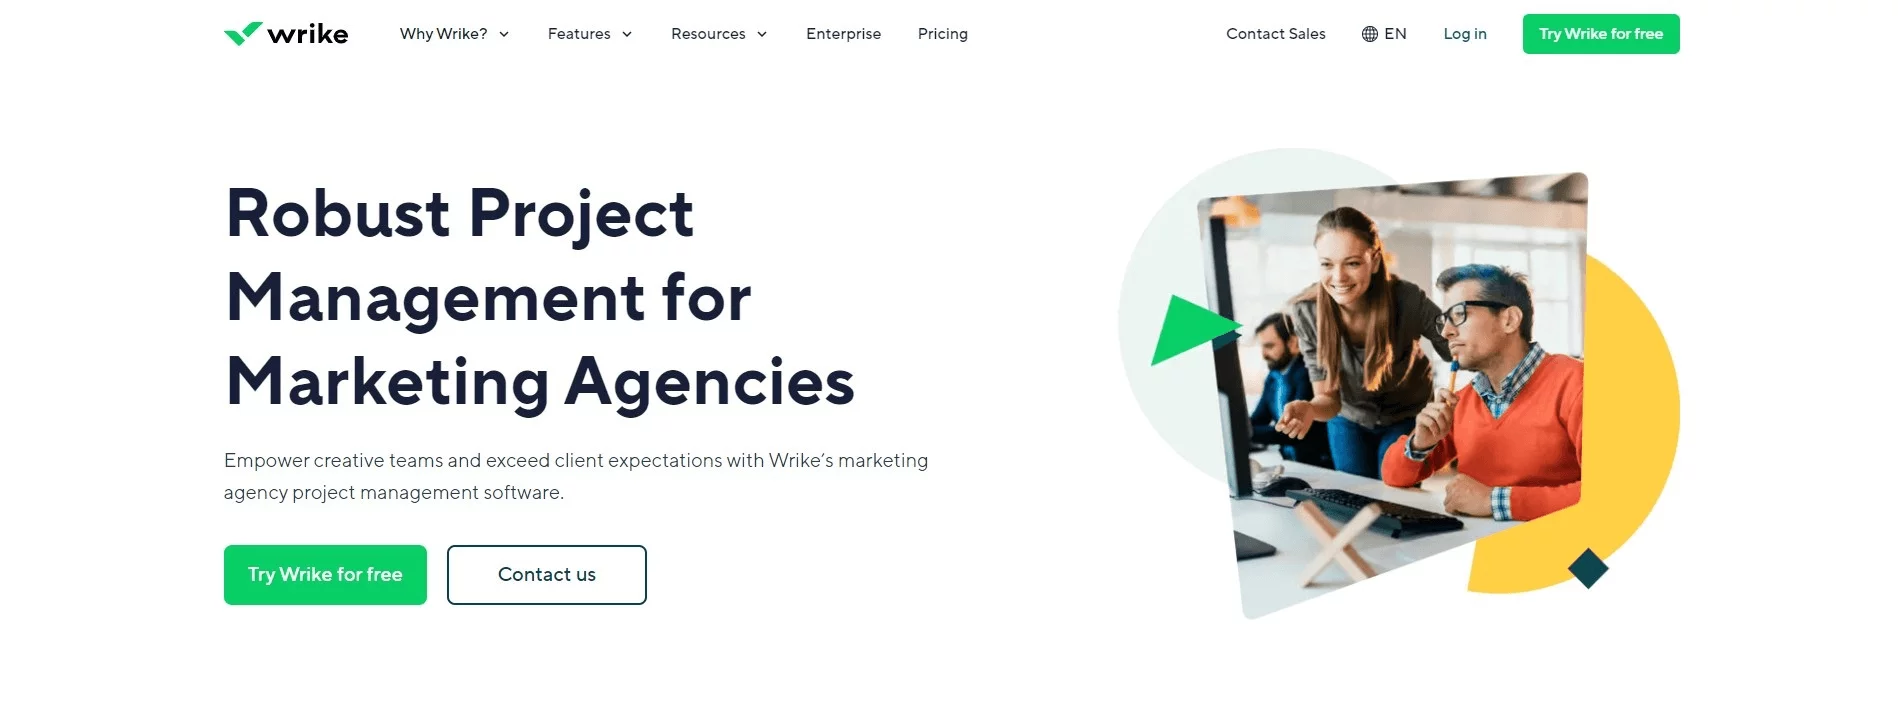 Wrike homepage promoting robust project management software for marketing agencies, featuring options to try for free or contact sales.